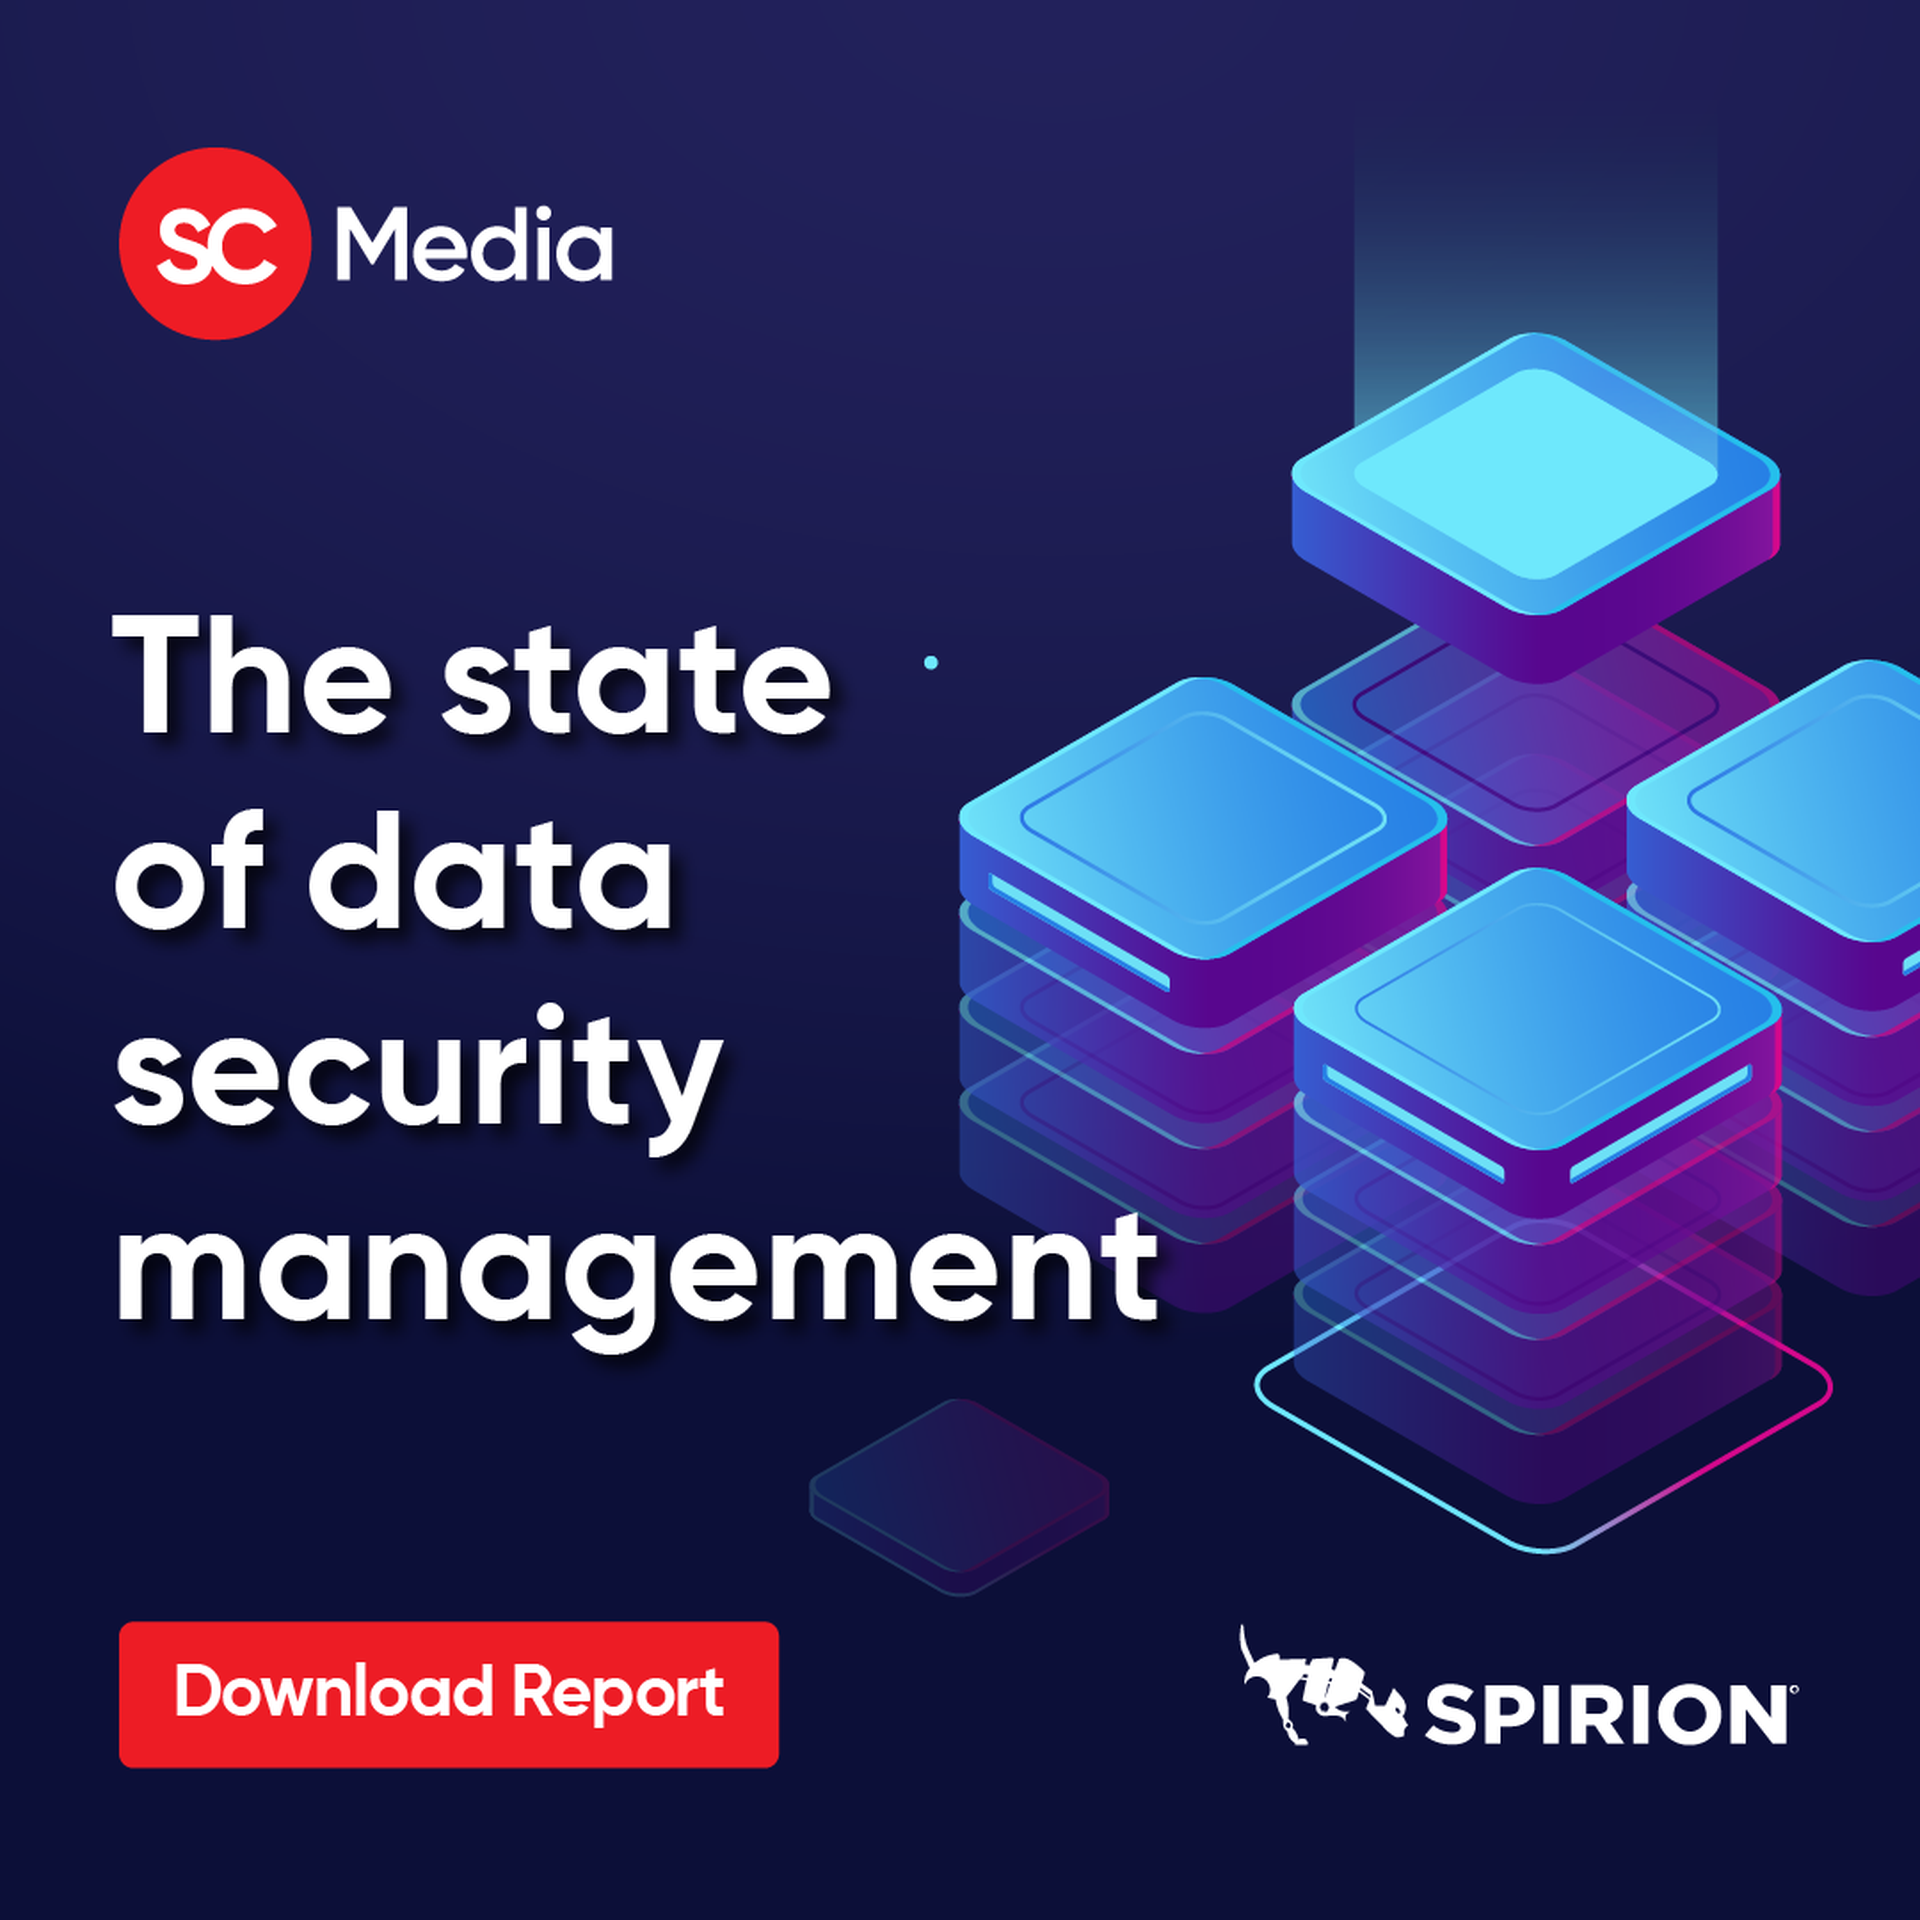 The state of data security management